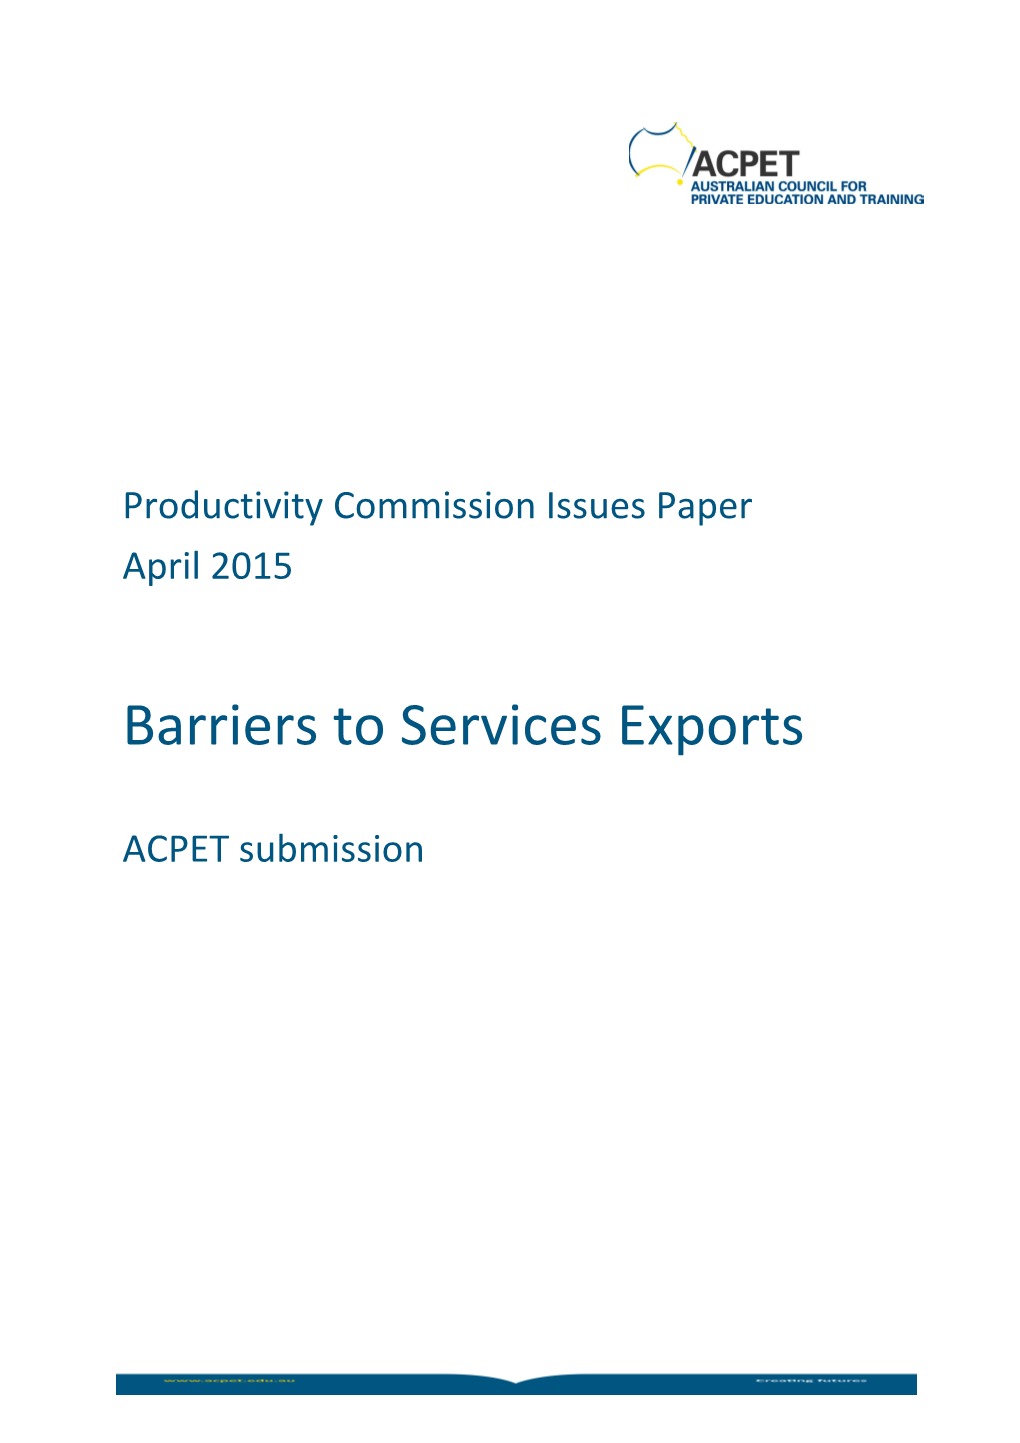 Submission 8 - ACPET - Services Exports - Commissioned Study